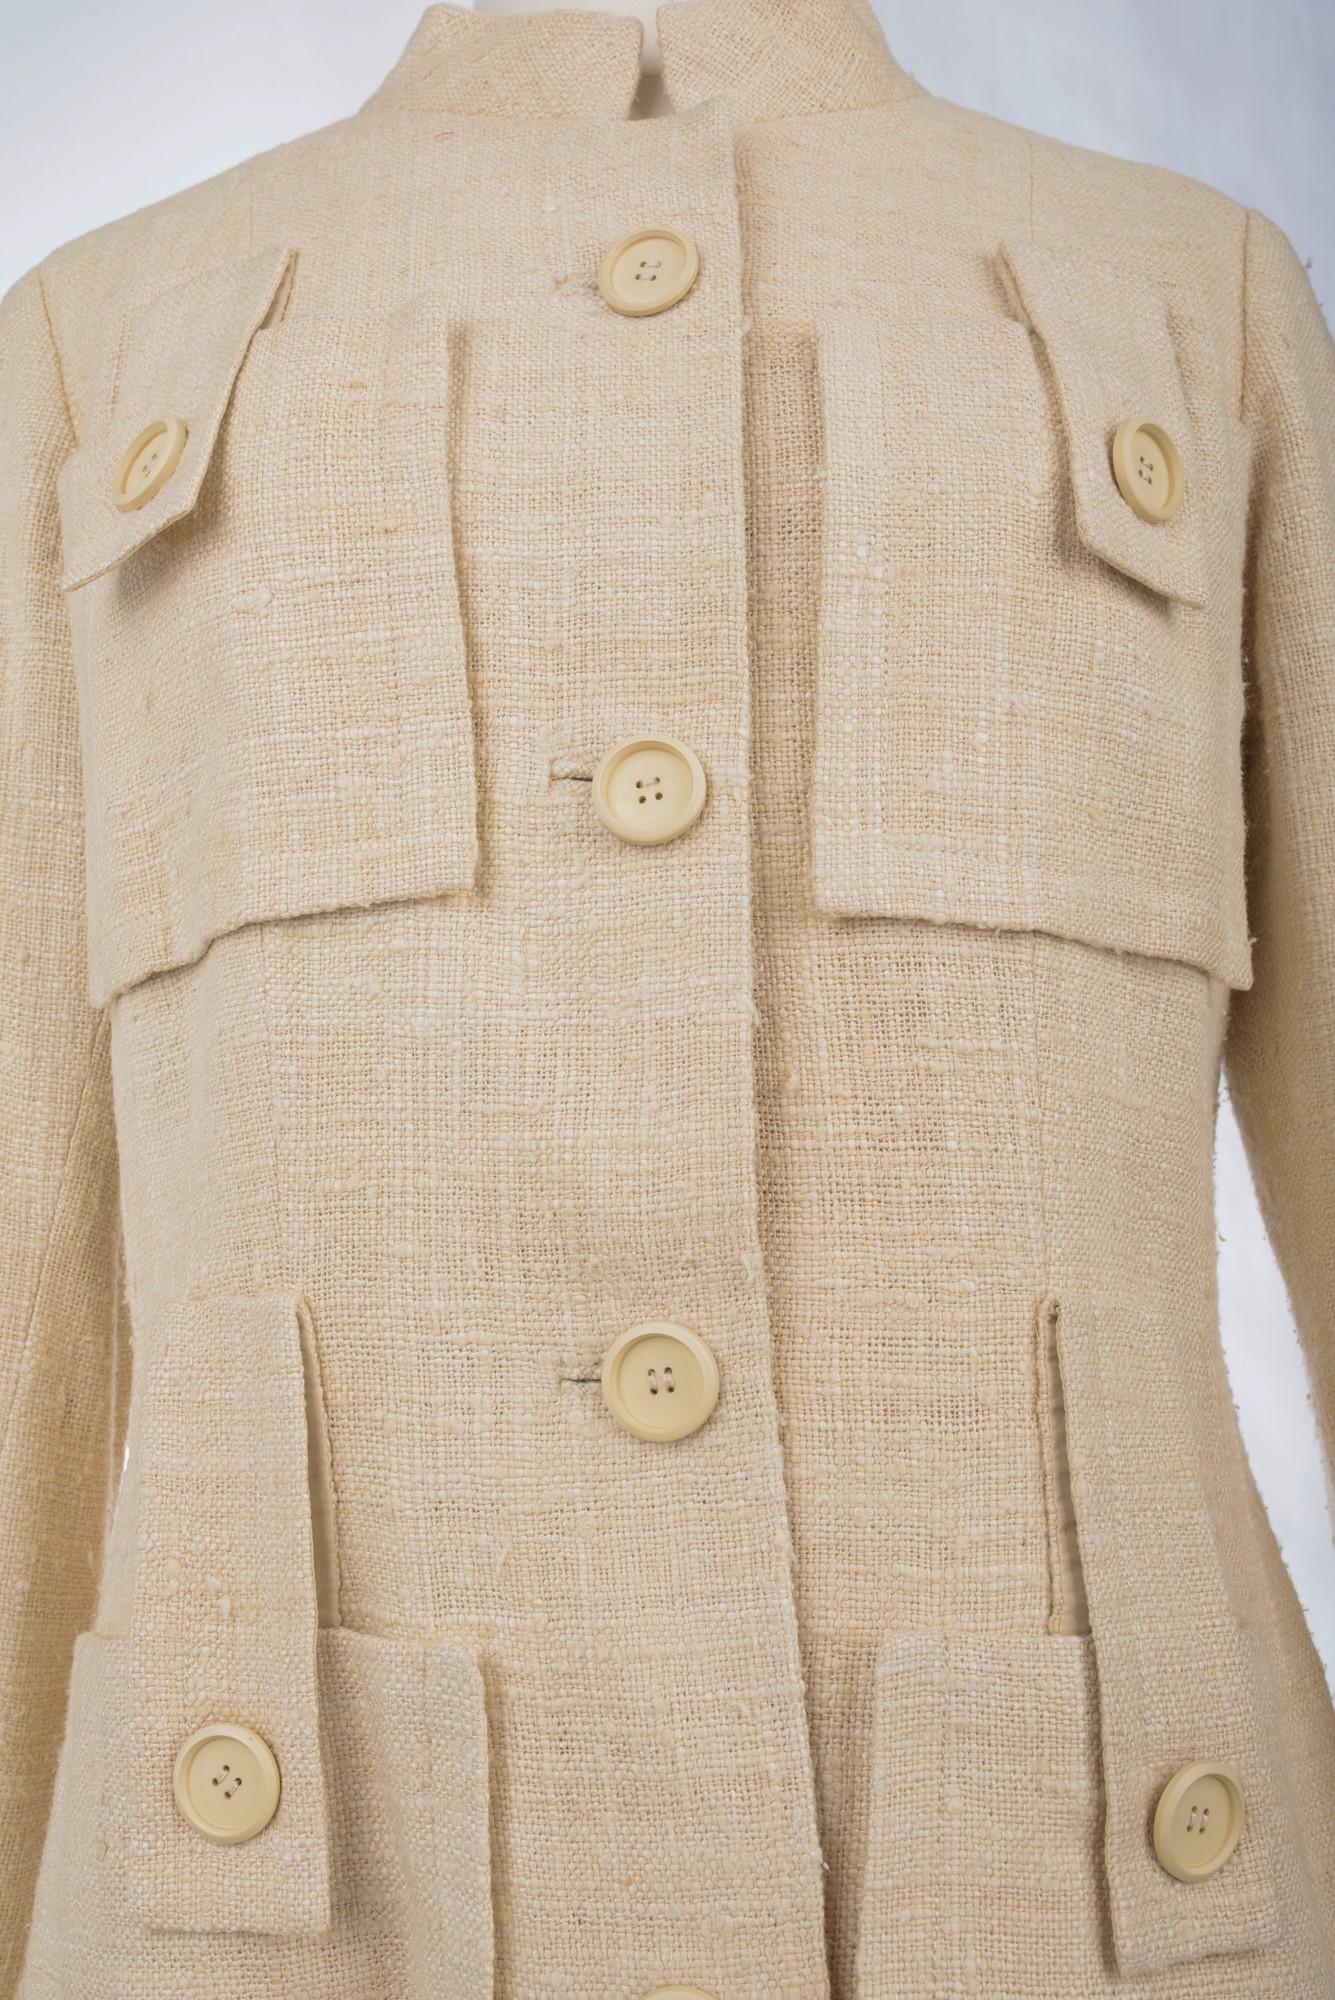  A French Safari Jacket In Beige Linen And Silk Toile Circa 1968-1972 1